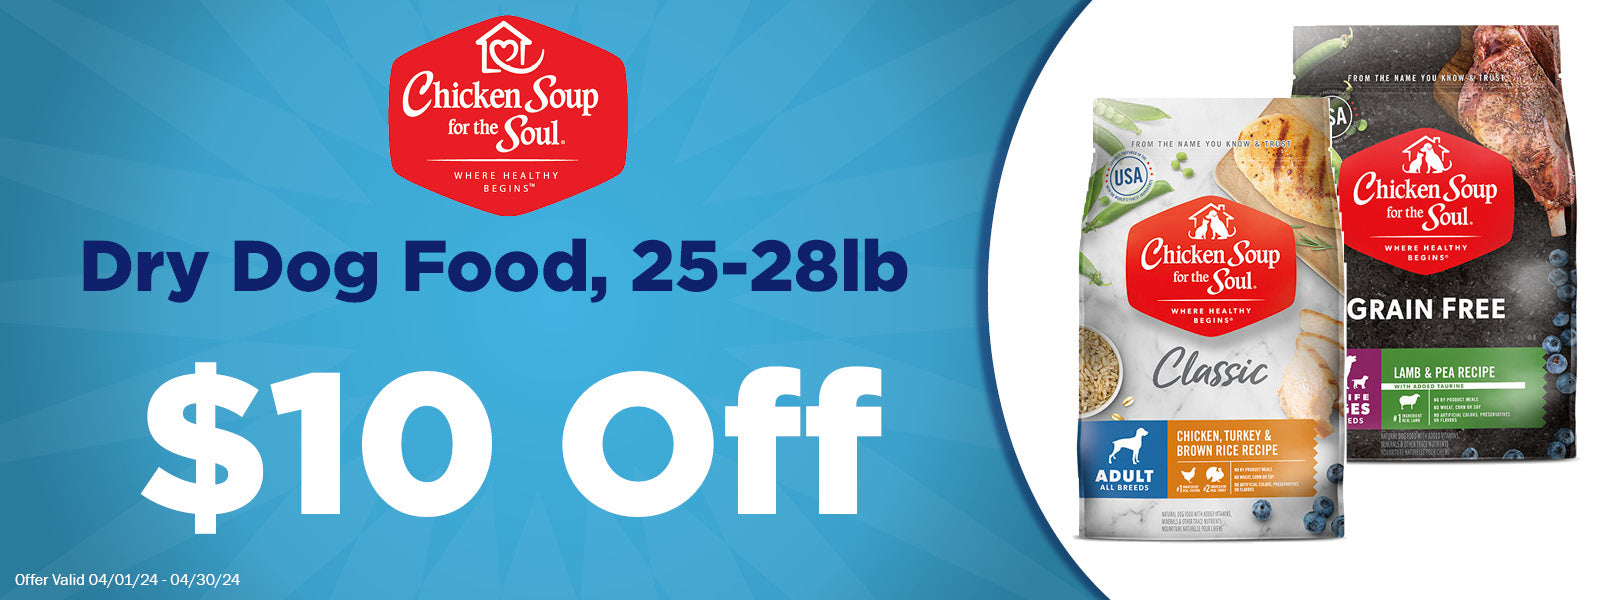 Chicken Soup for the Soul Dry Dog Food 22lb+ $10 Off